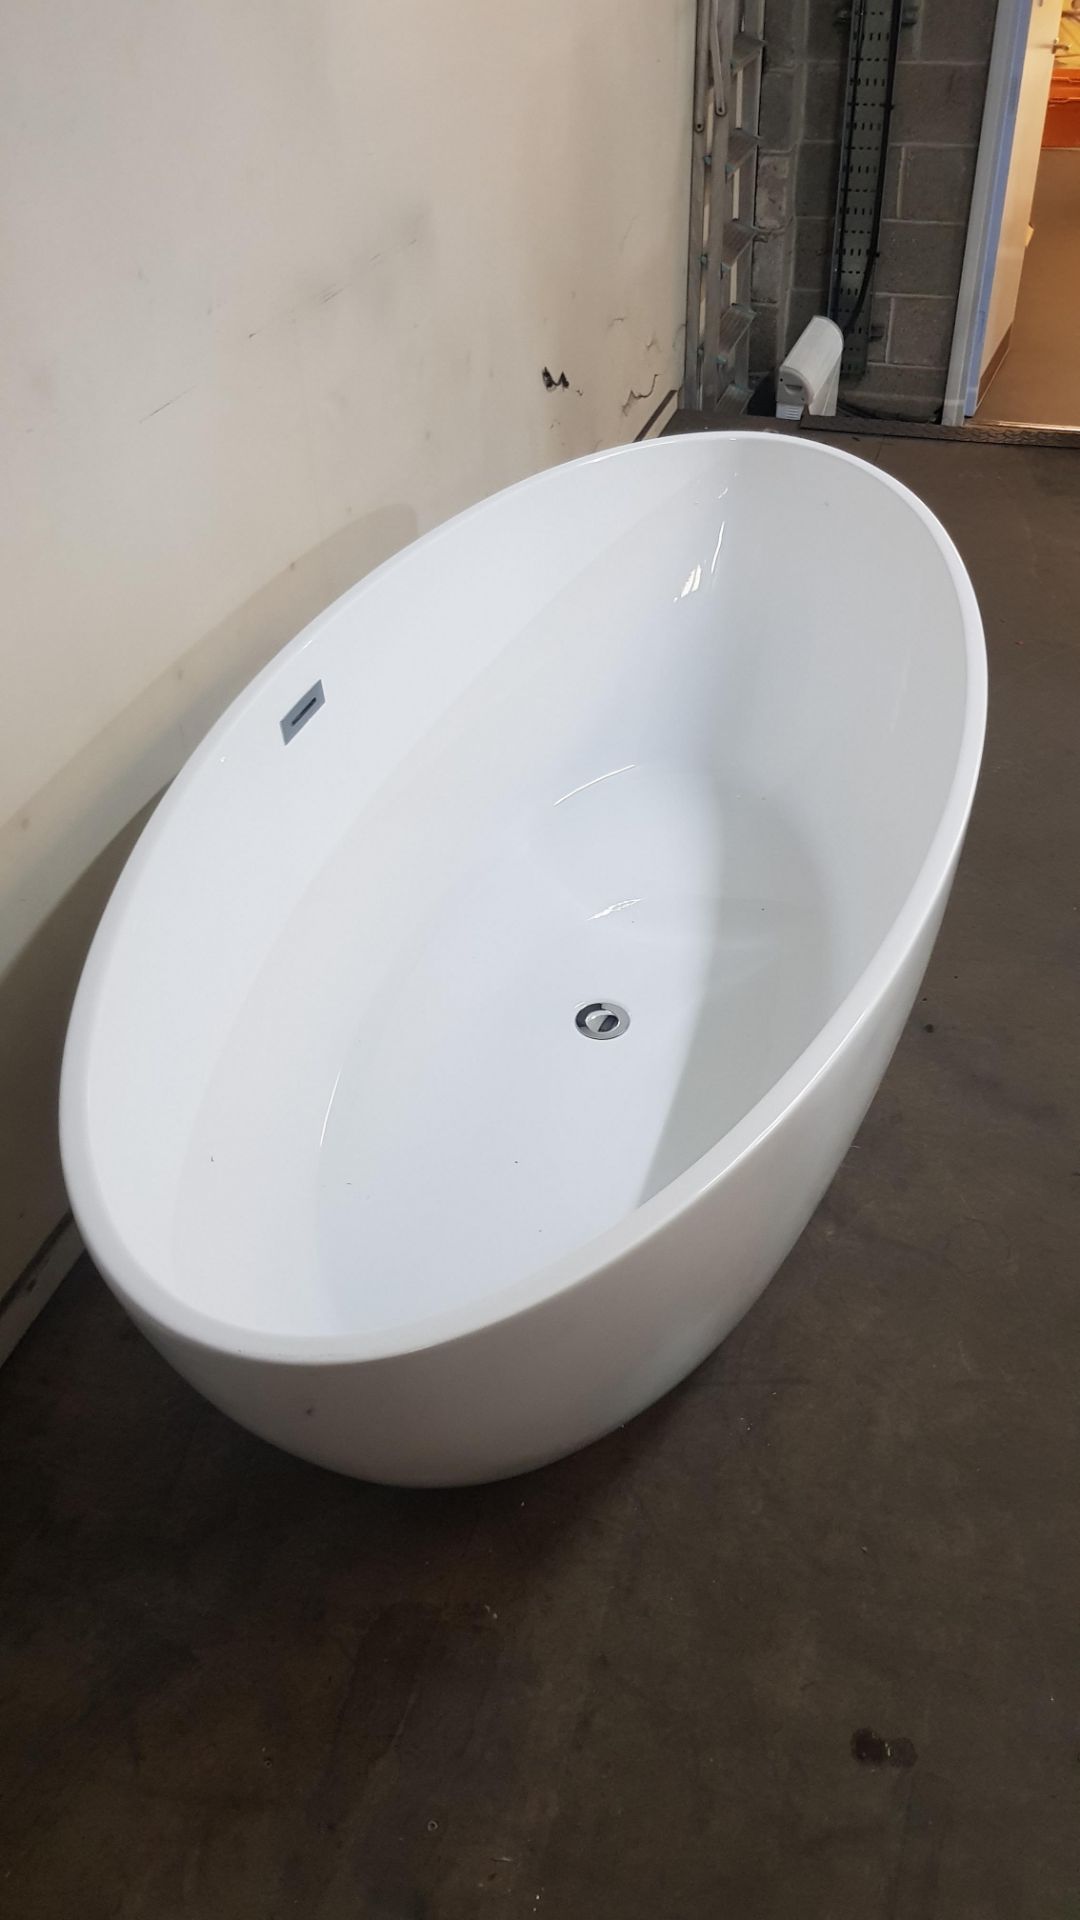 Mode Bathrooms Freestanding Acrylic Bath With Drain & Overflow 1800x870mm (RBQ169) - Image 2 of 3